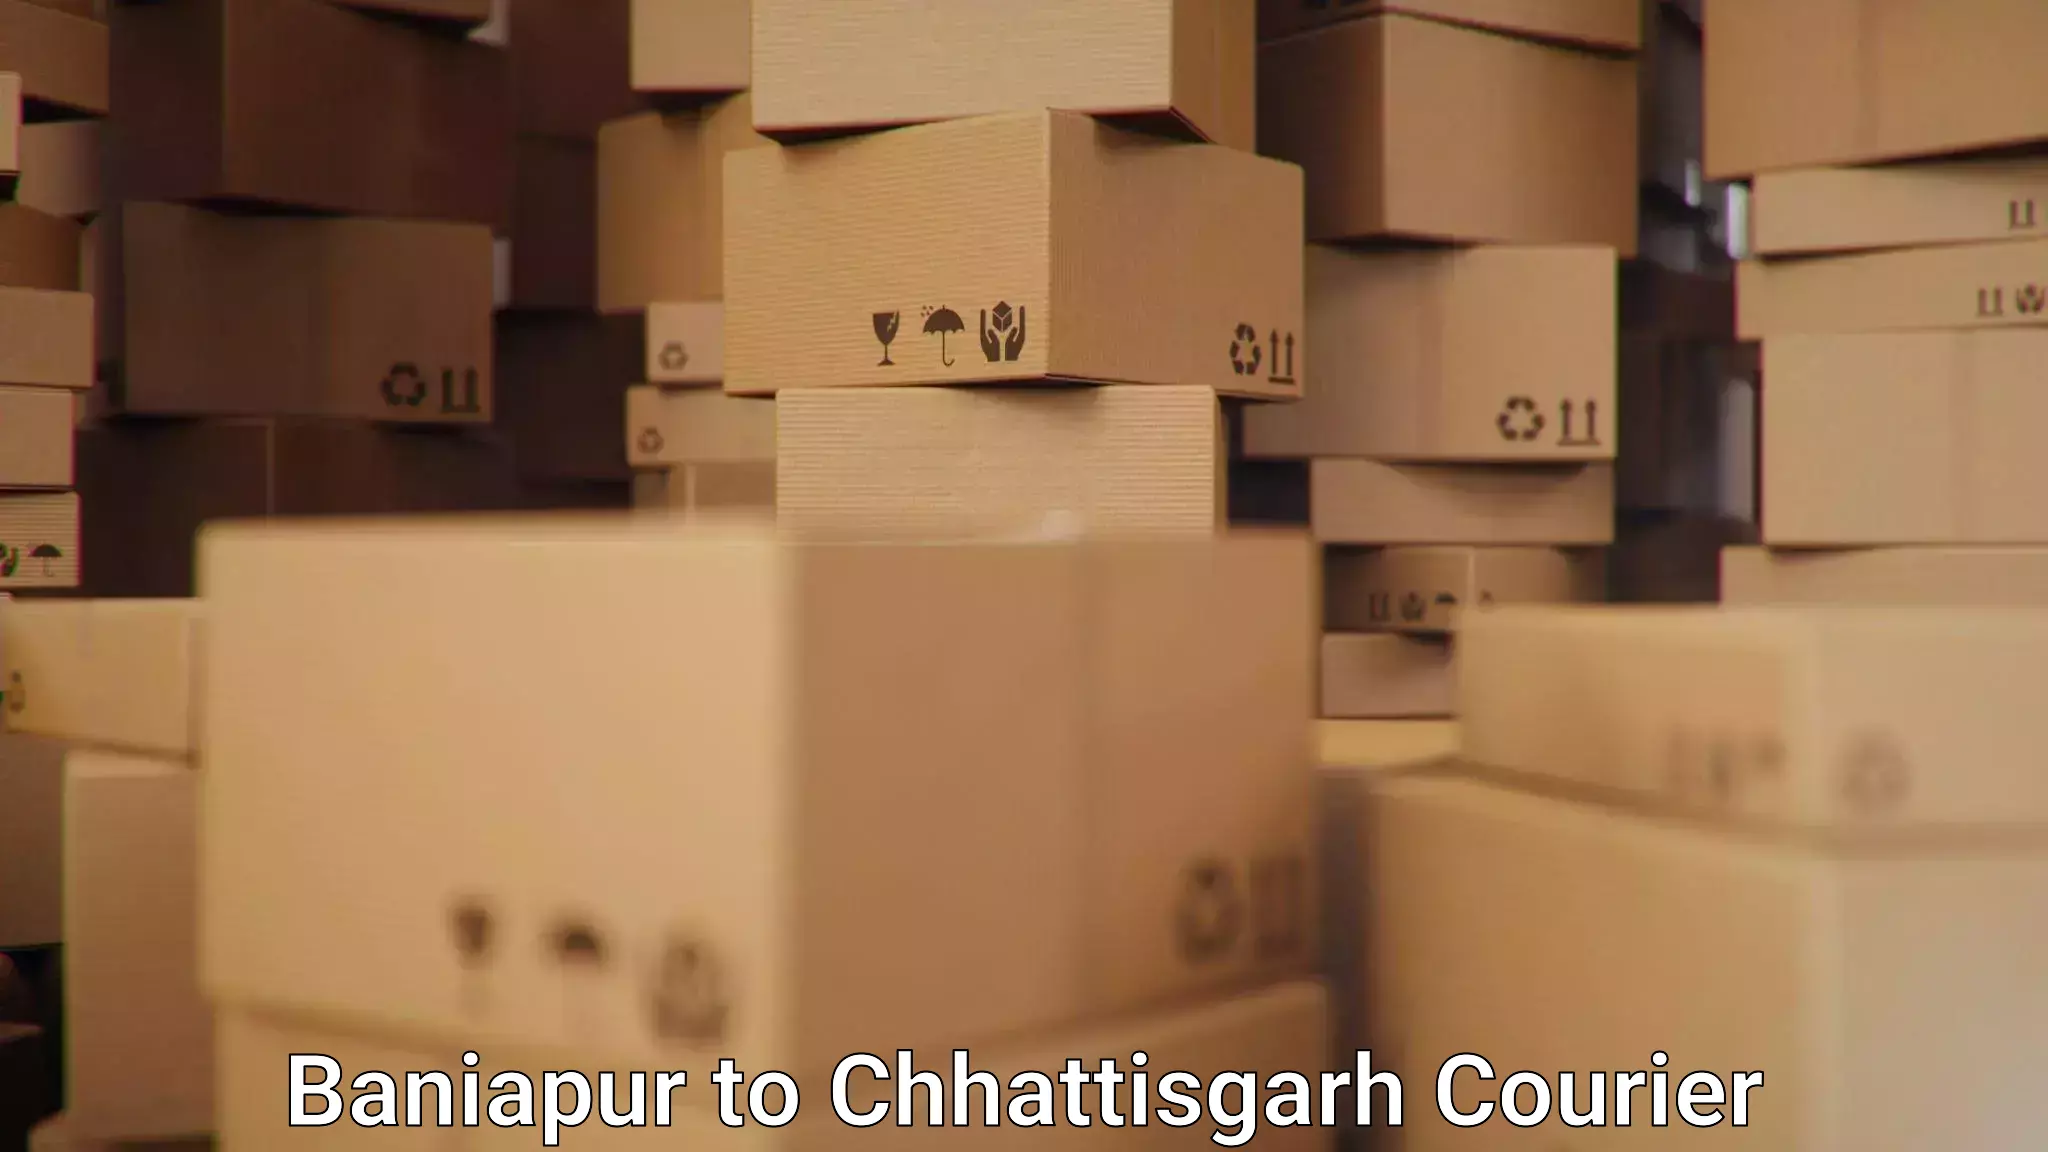 State-of-the-art courier technology in Baniapur to Rajnandgaon